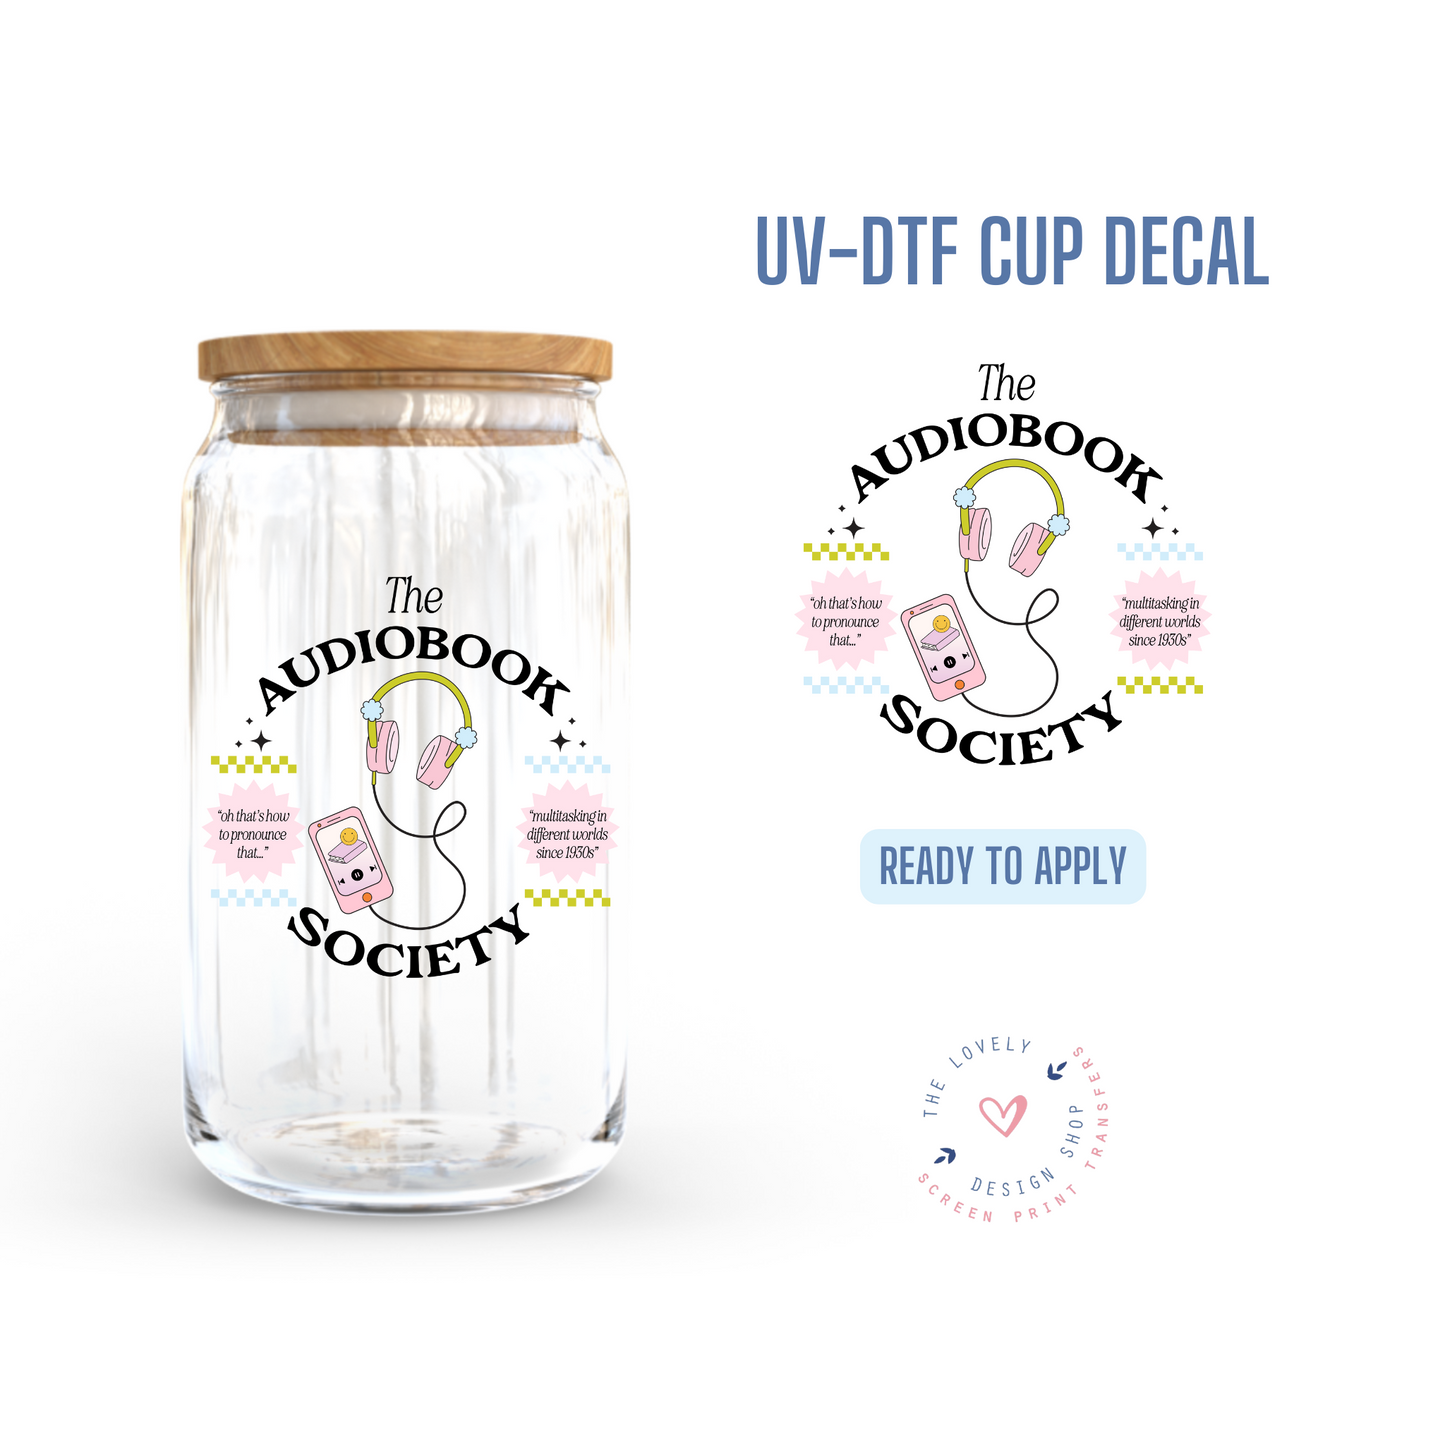 Audiobook Society - UV DTF Cup Decal (Ready to Ship) Mar 19